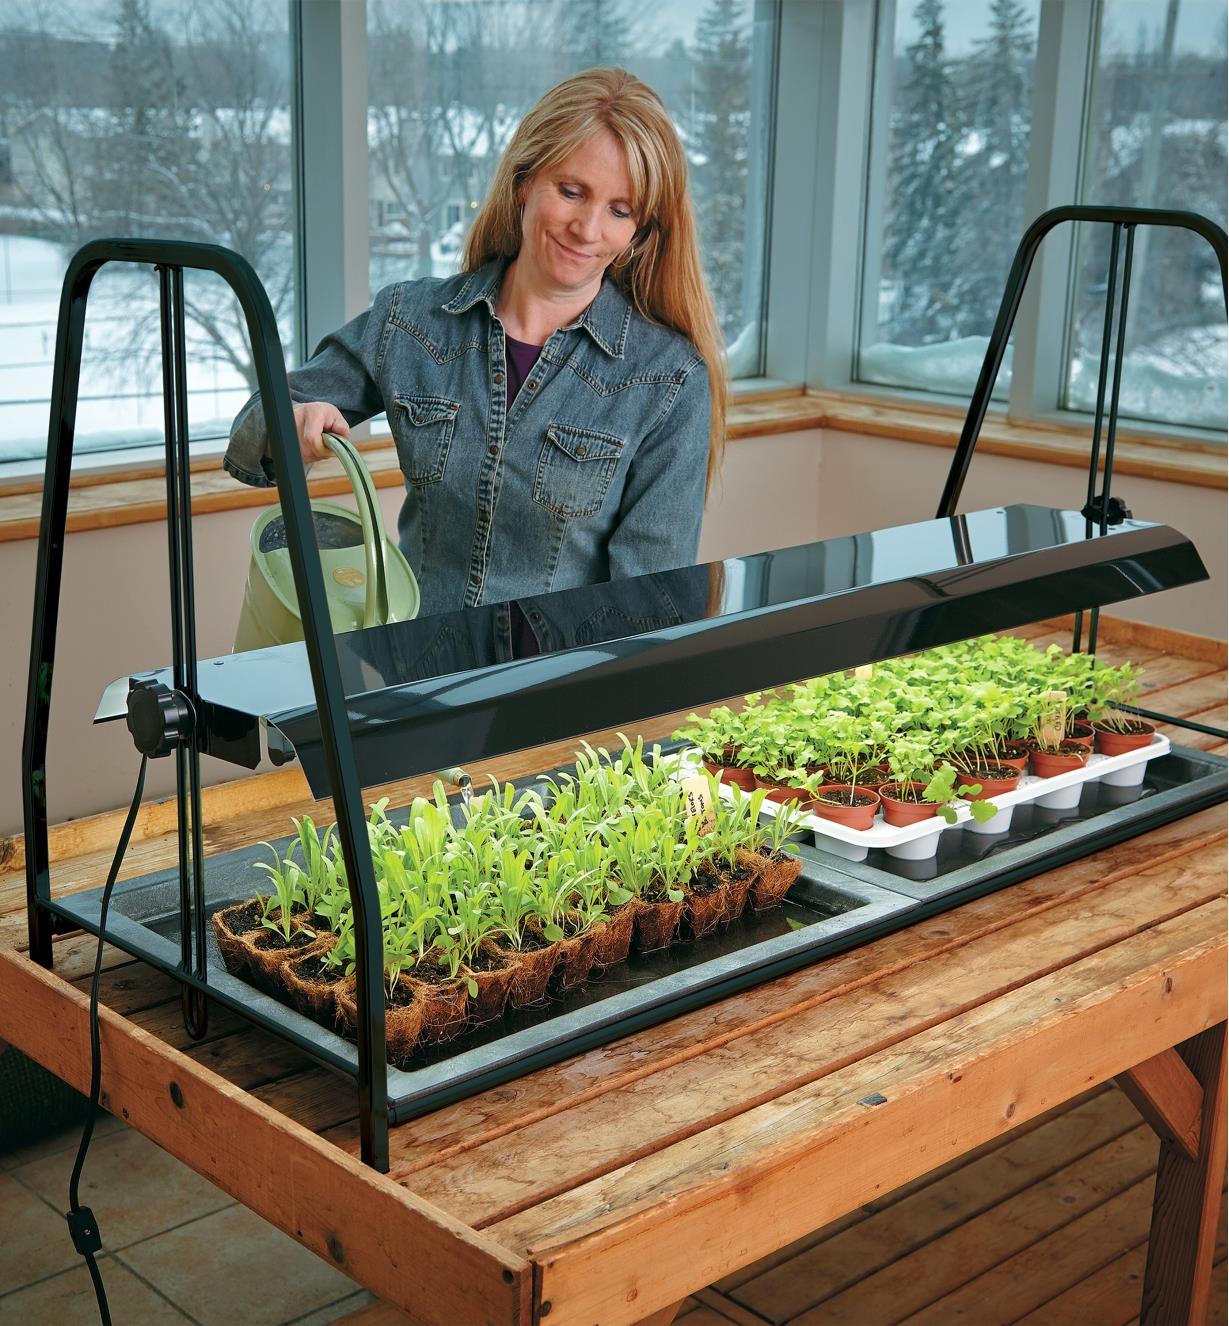 A woman waters seedlings growing under the Tabletop Floralight T5 LED Full-Spectrum Grow-Light Stand